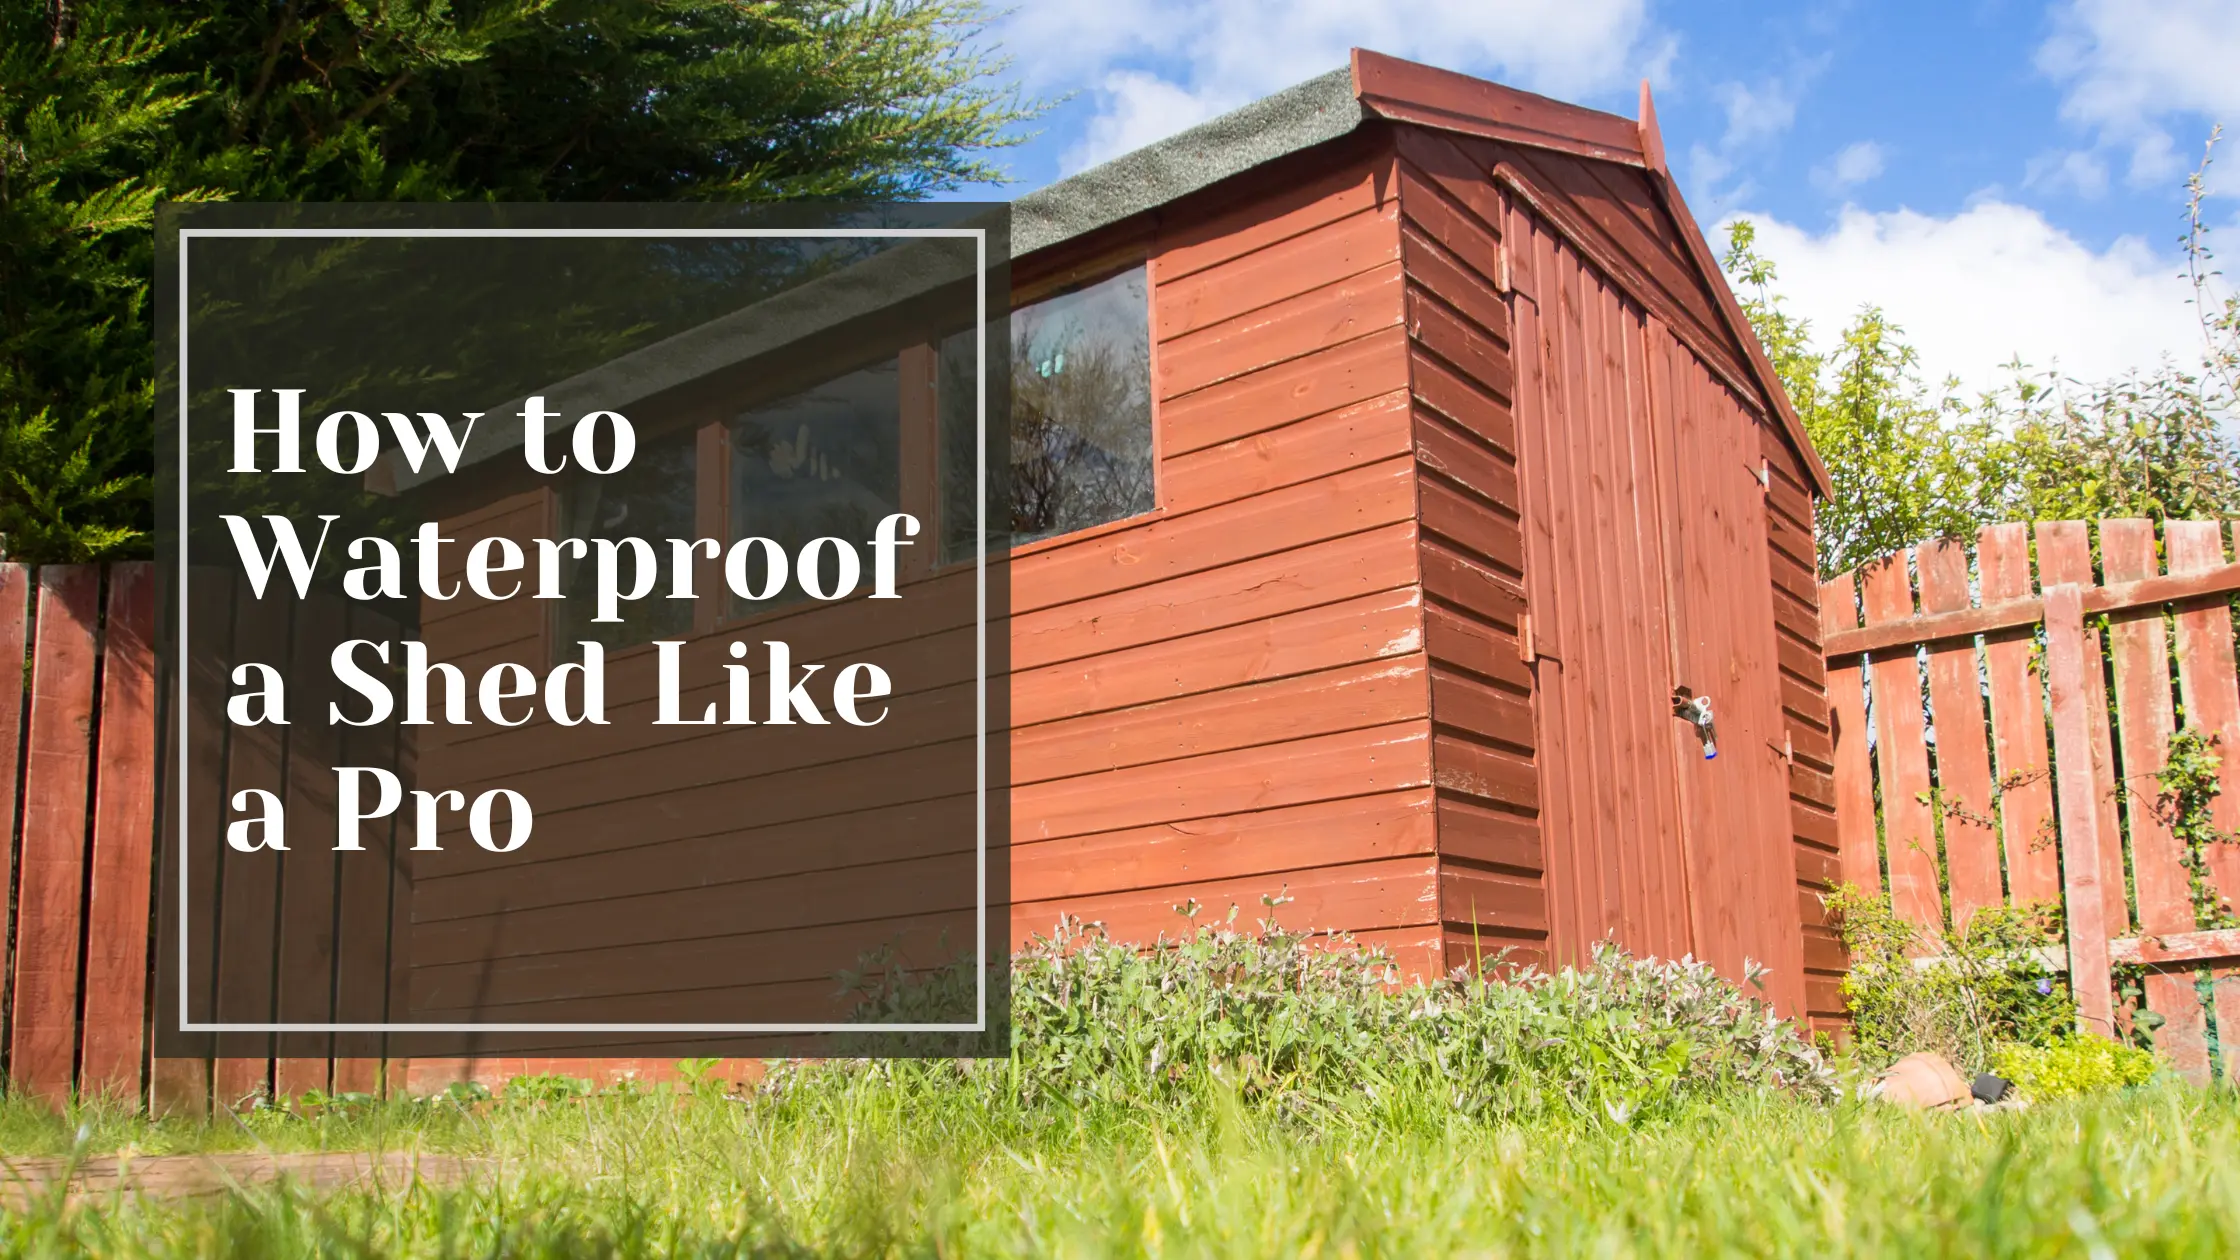 How to Waterproof a Shed Like a Pro